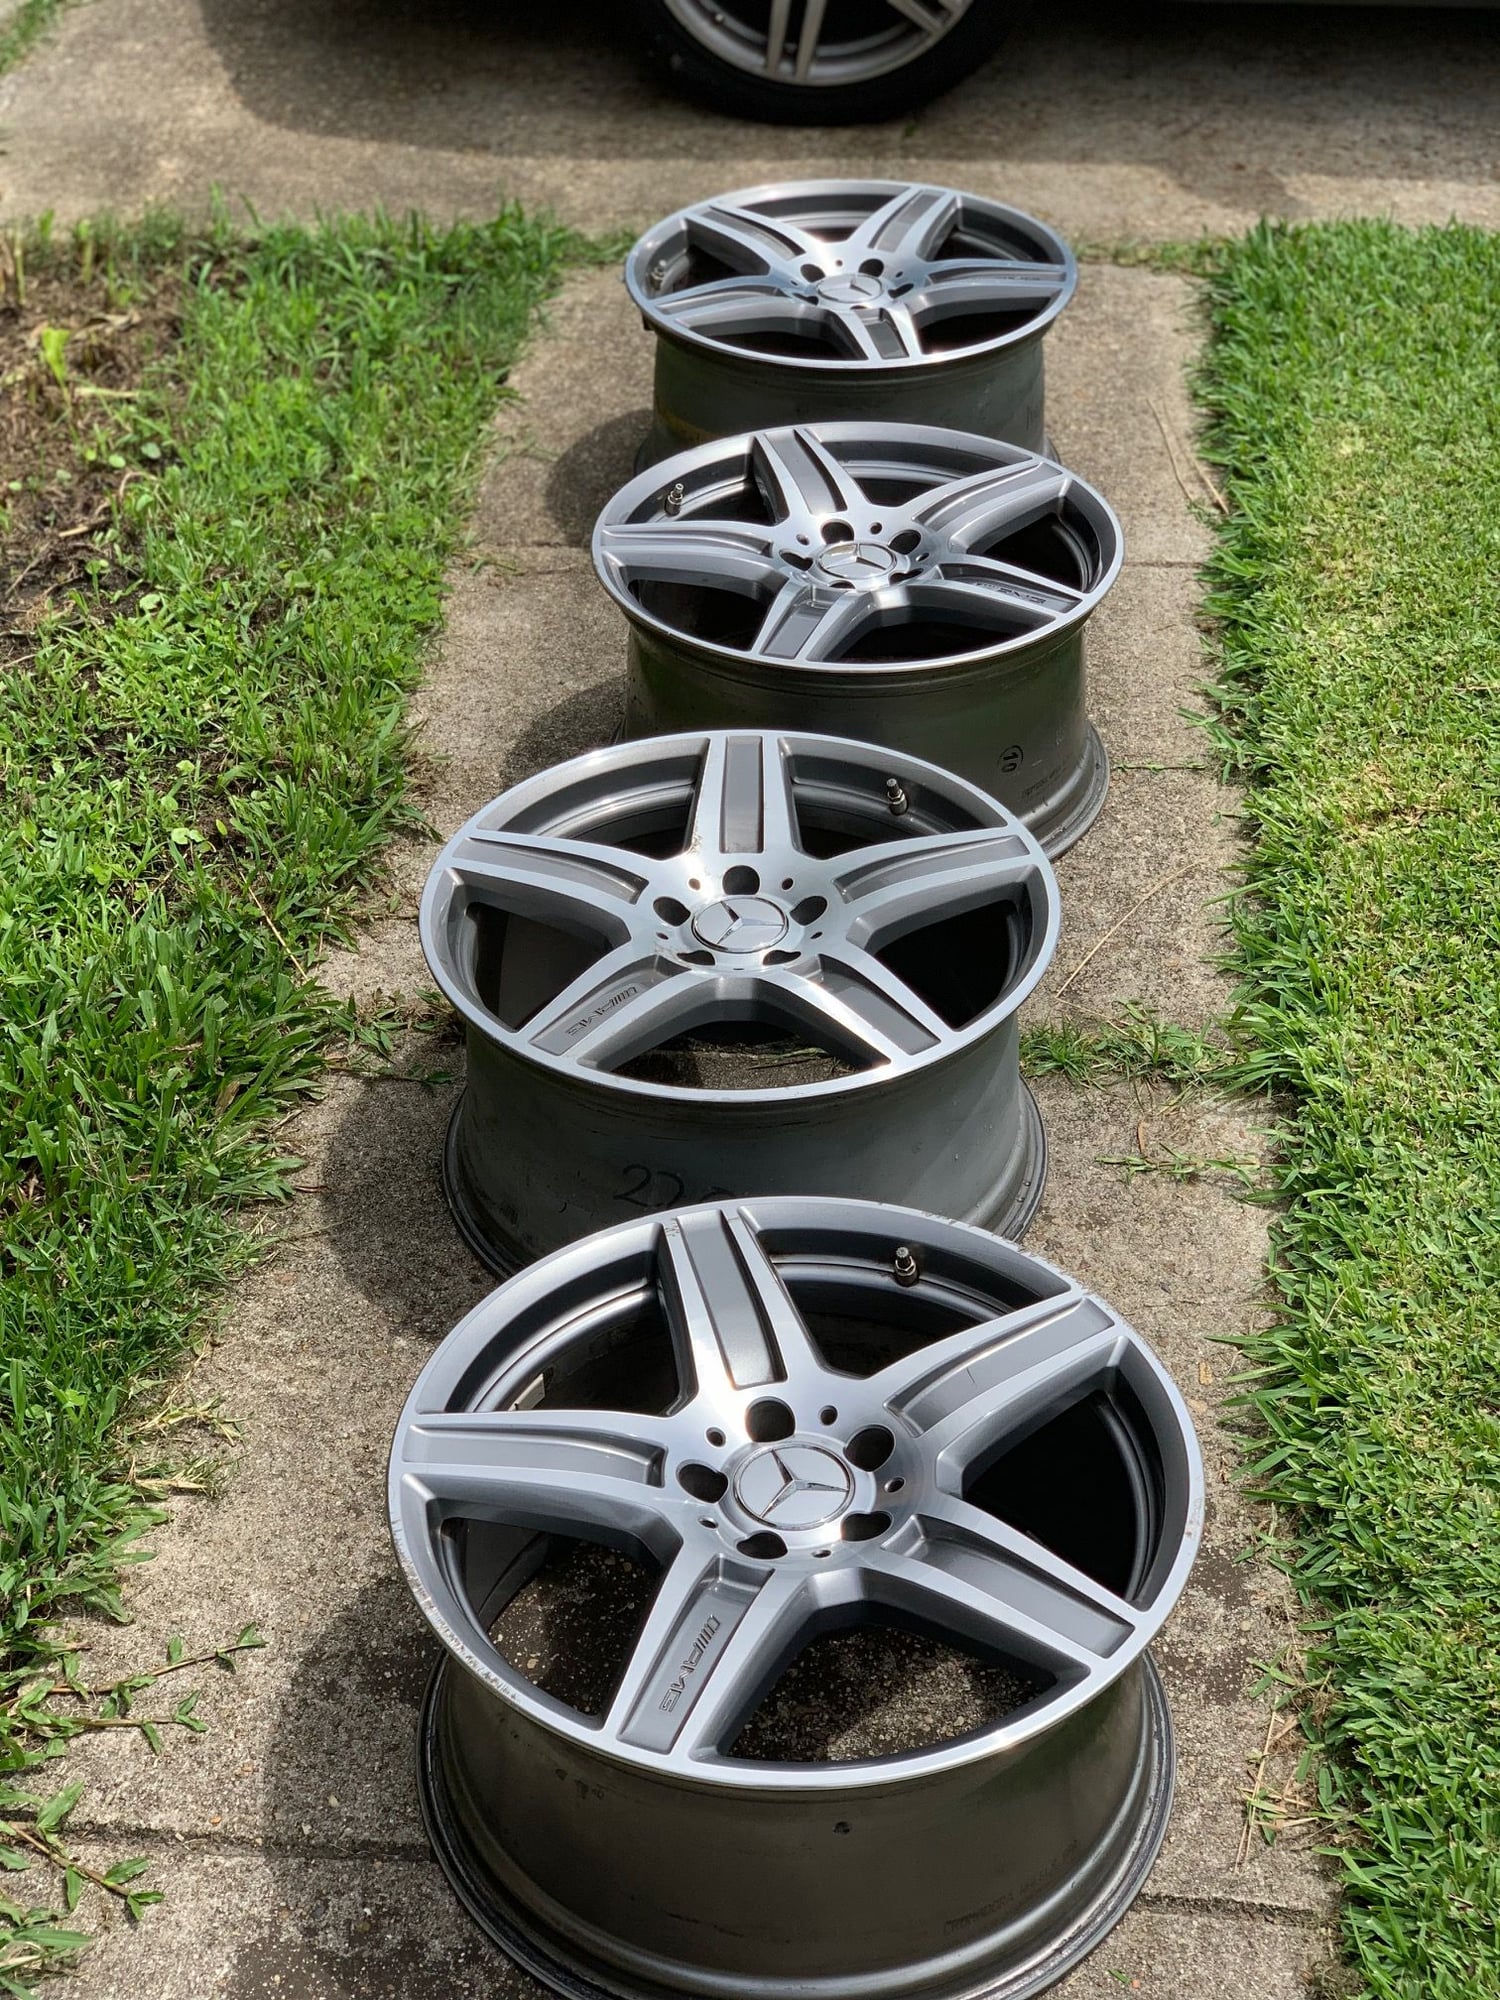 Wheels and Tires/Axles - FOR SALE: 4 OEM E63 Wheels/Rims 18x9 Et37 - Used - 2010 to 2014 Mercedes-Benz E63 AMG - 2010 to 2014 Mercedes-Benz E350 - 2010 to 2014 Mercedes-Benz E550 - Harvey, LA 70058, United States